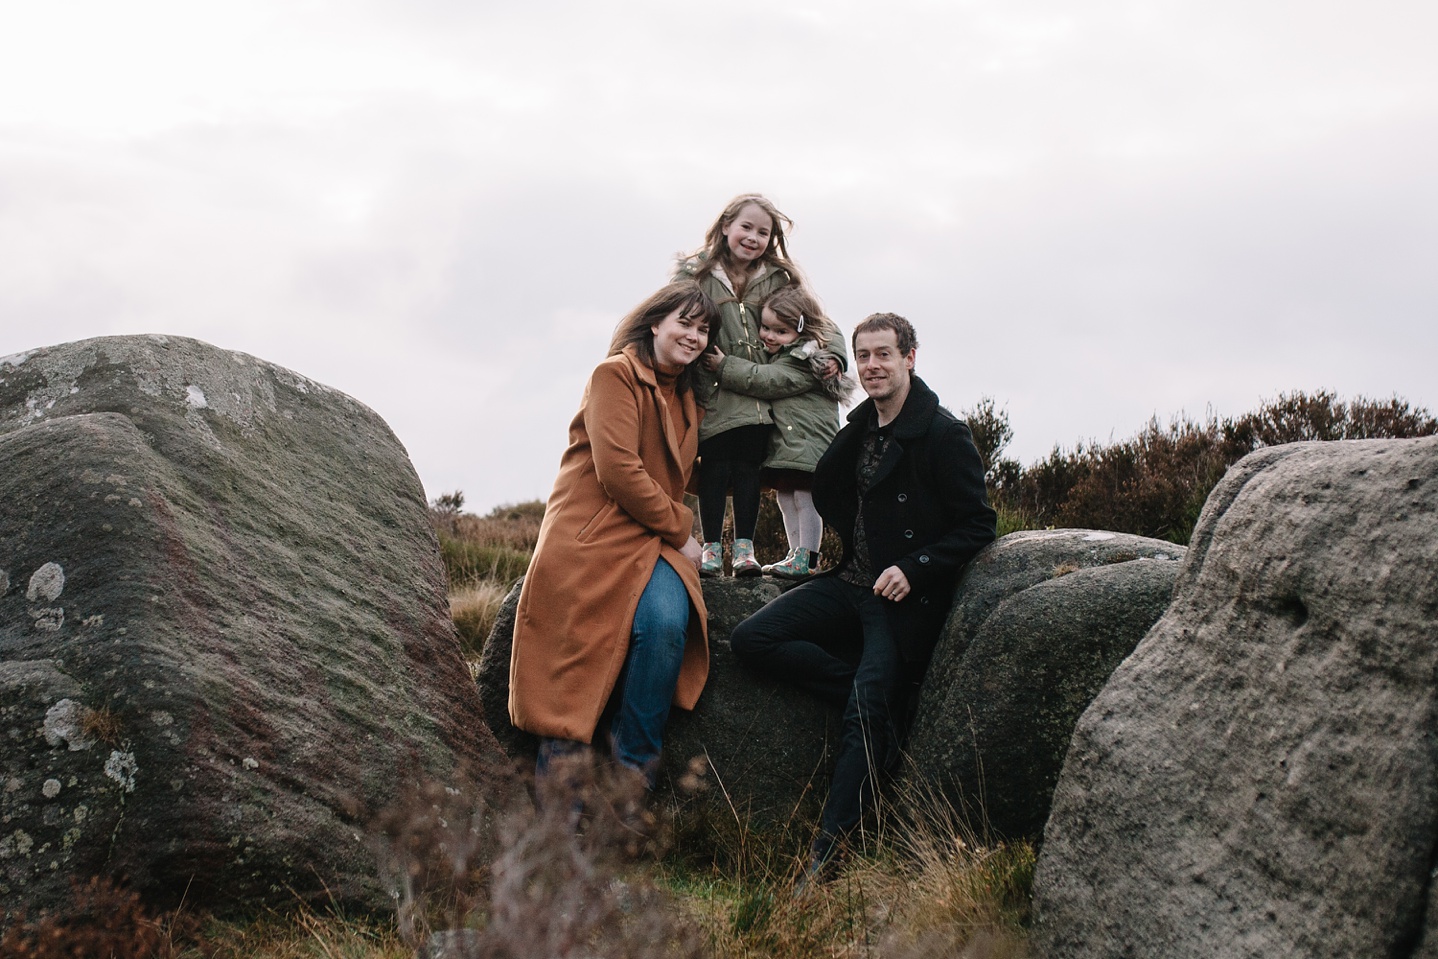 mum and dad sat on a rock with two little girls stood up beside them smiling at the camera